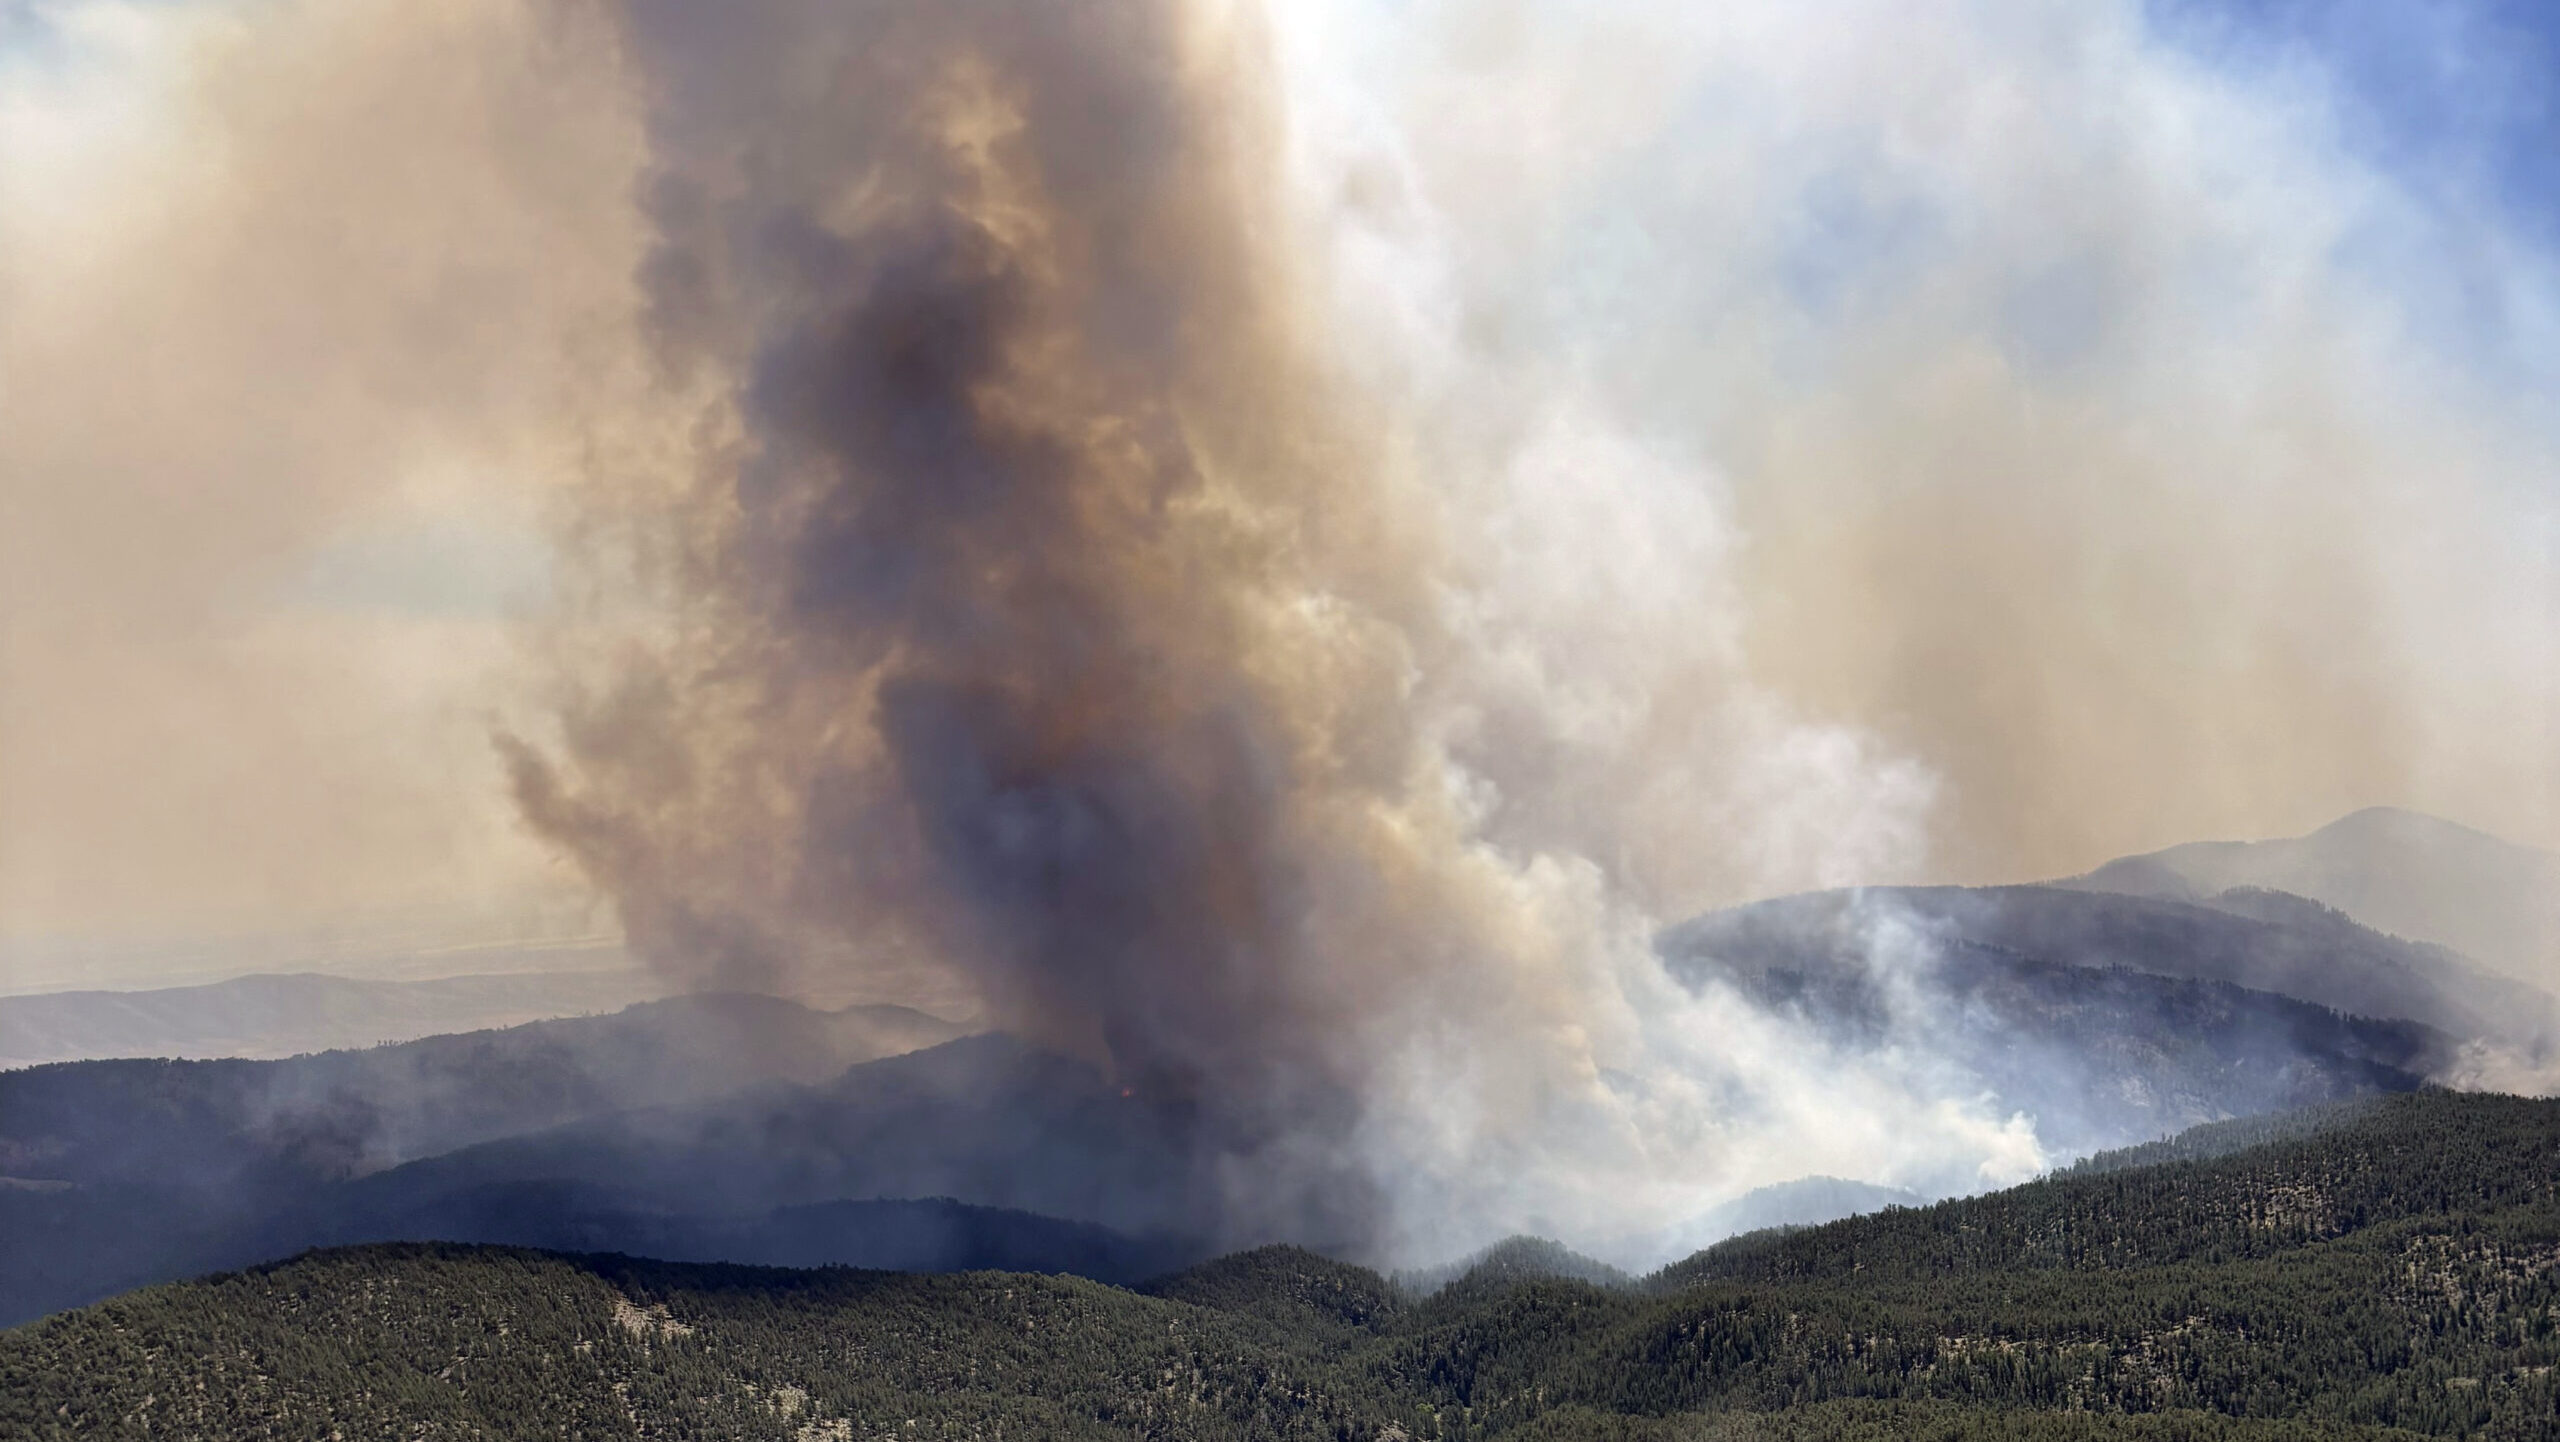 A new study suggests wildfire smoke inhalation increases the risk for dementia....